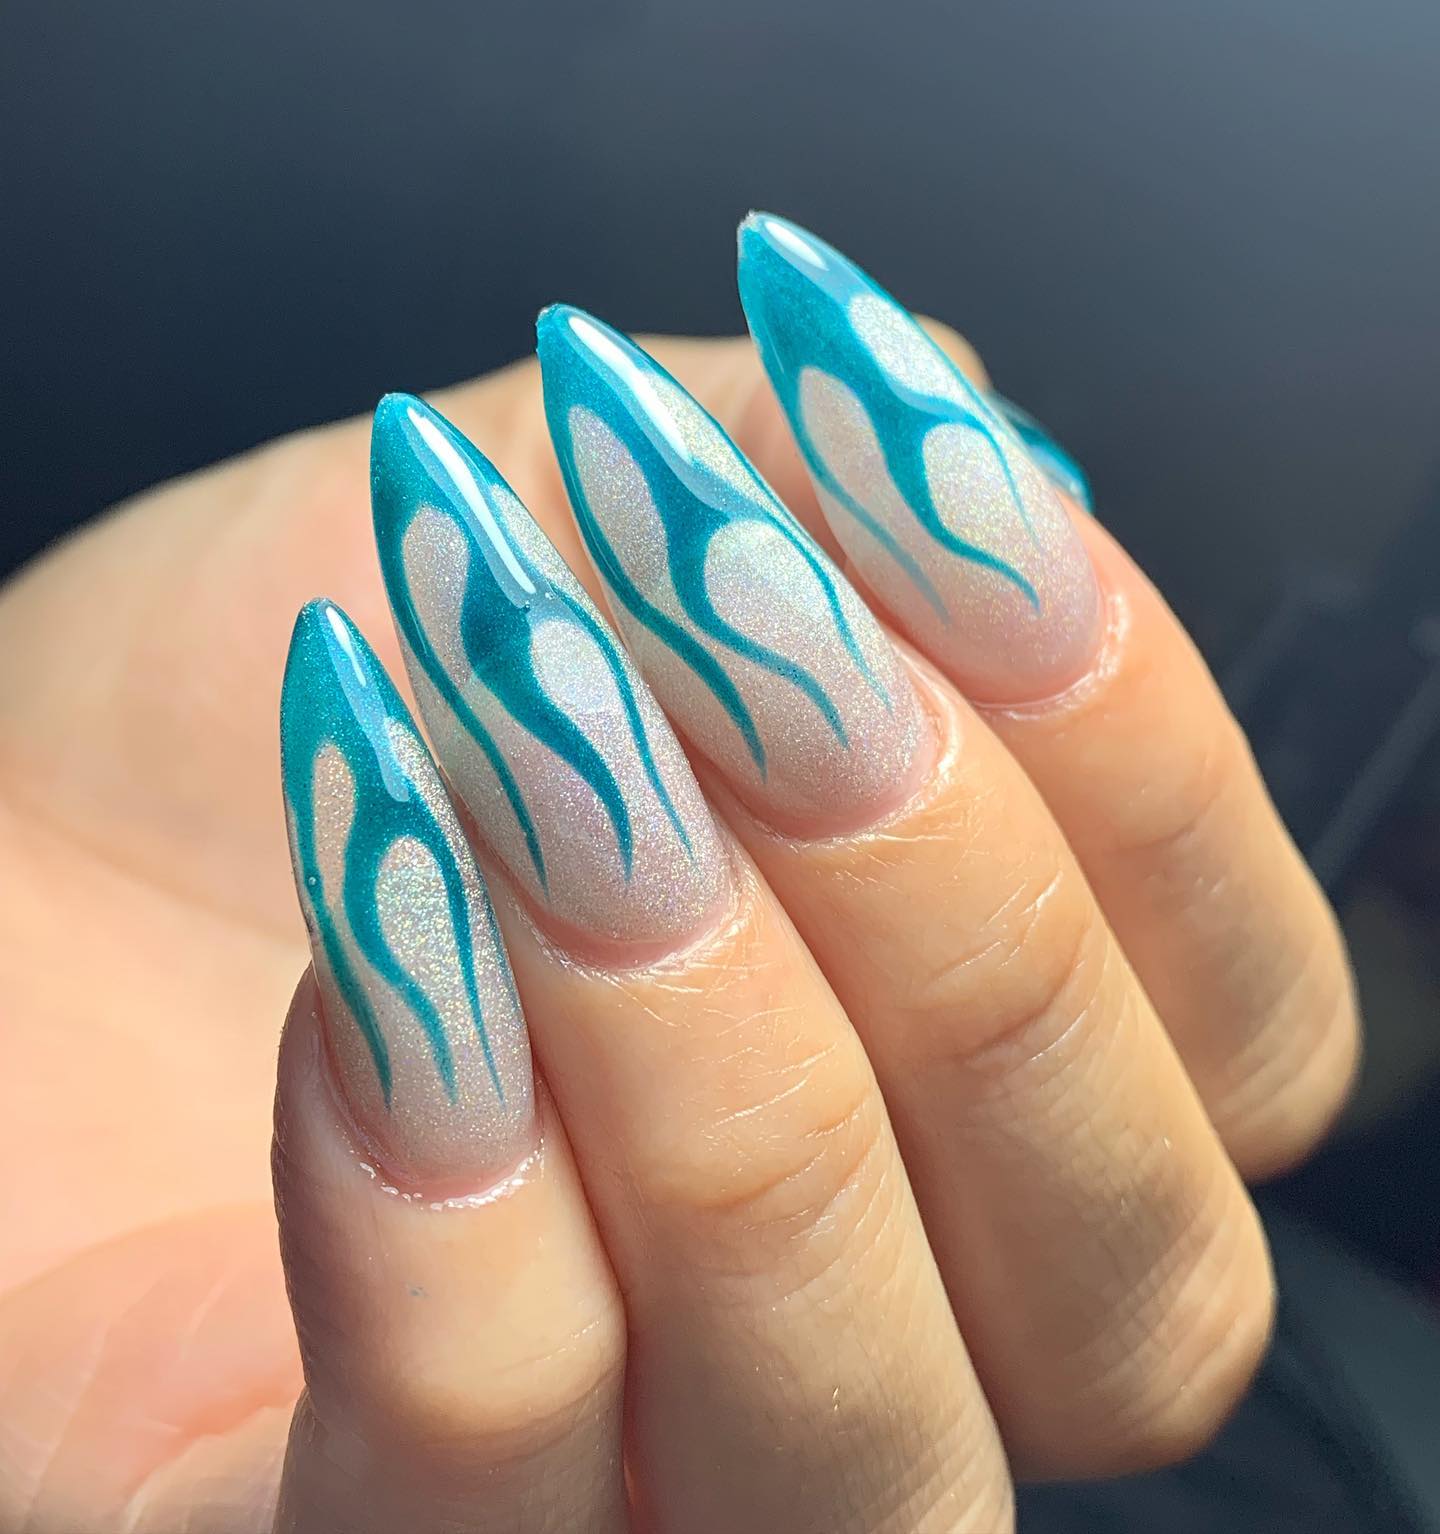 Is there a happier and calmer color than turquoise? For your flame nails, this color is a great choice. Long stiletto nails are taken to a whole different level and you will be on fire with this nail art.